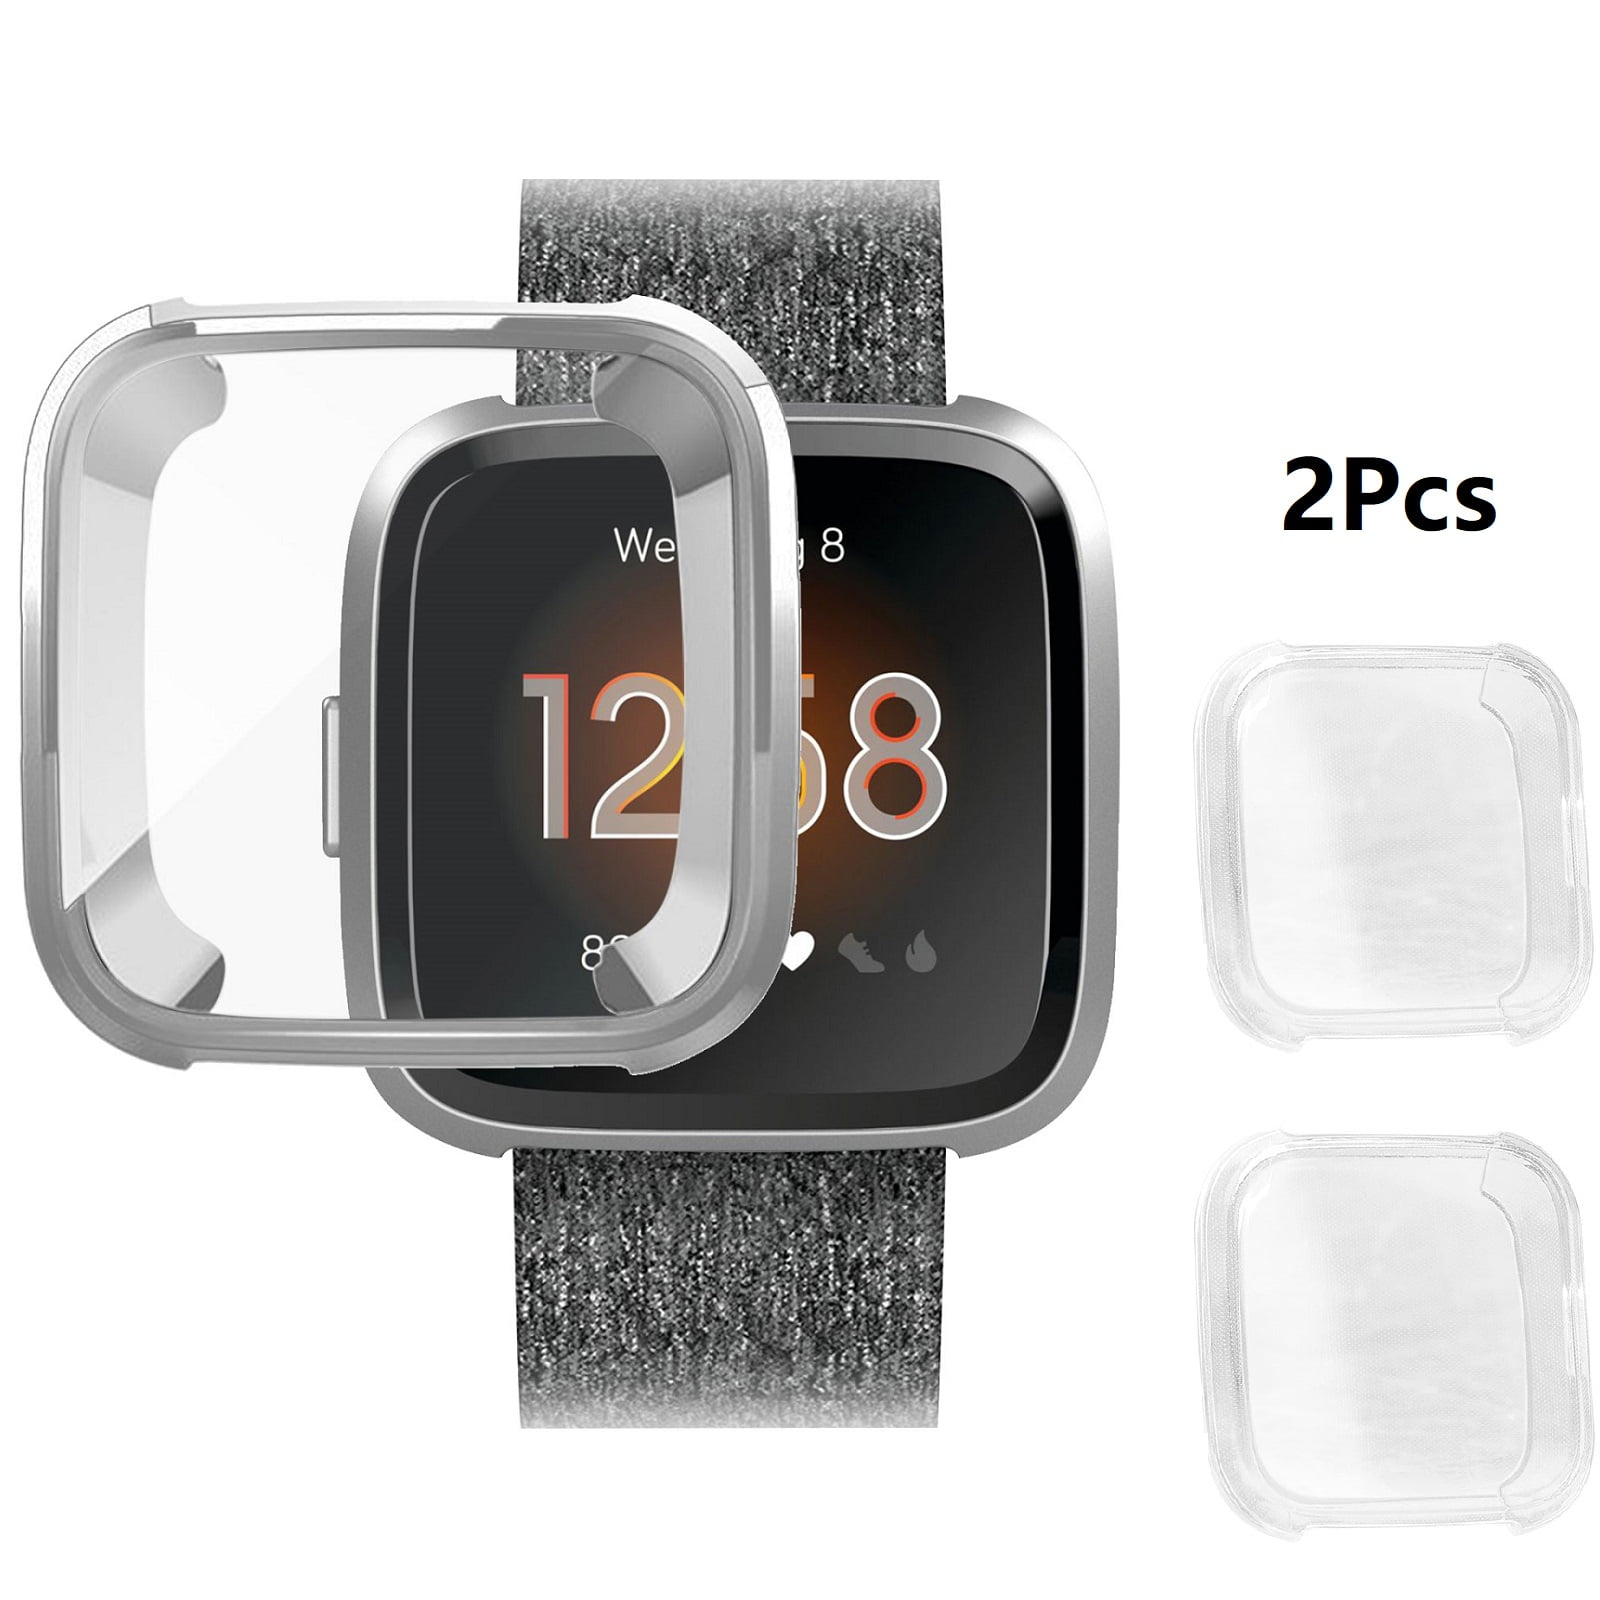 1*Metallic Silicone Screen Protector Full Protection Case Cover For Fitbit Versa 